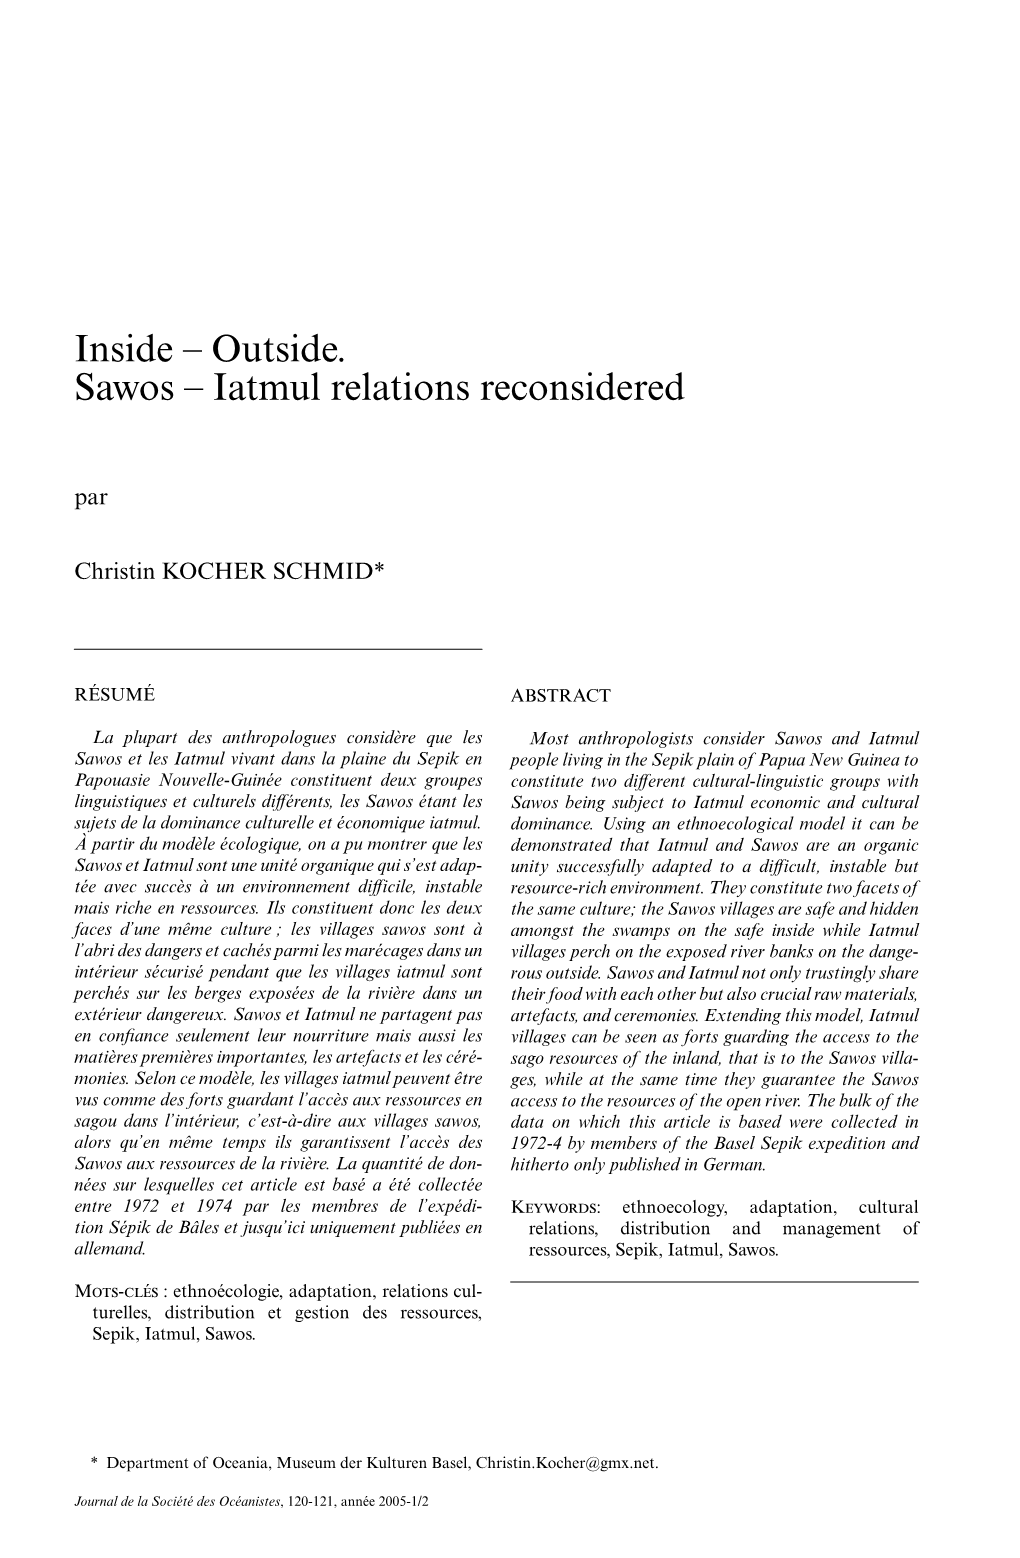 Inside ¢ Outside. Sawos ¢ Iatmul Relations Reconsidered